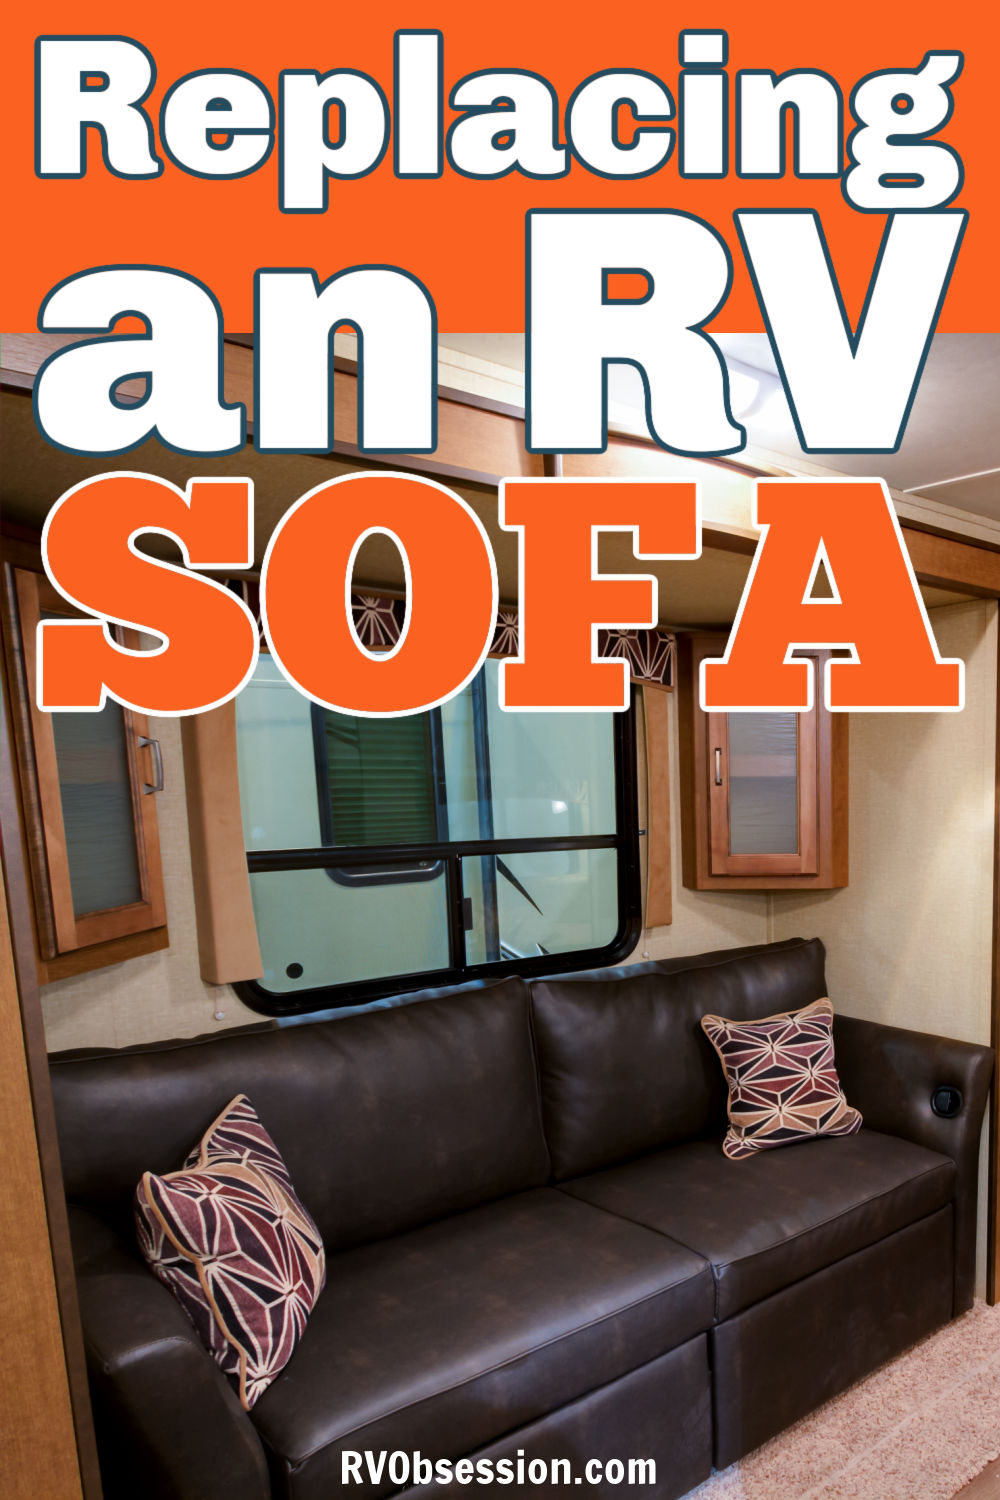 Dark sofa in an RV with text overlay that reads: Replacing an RV sofa.